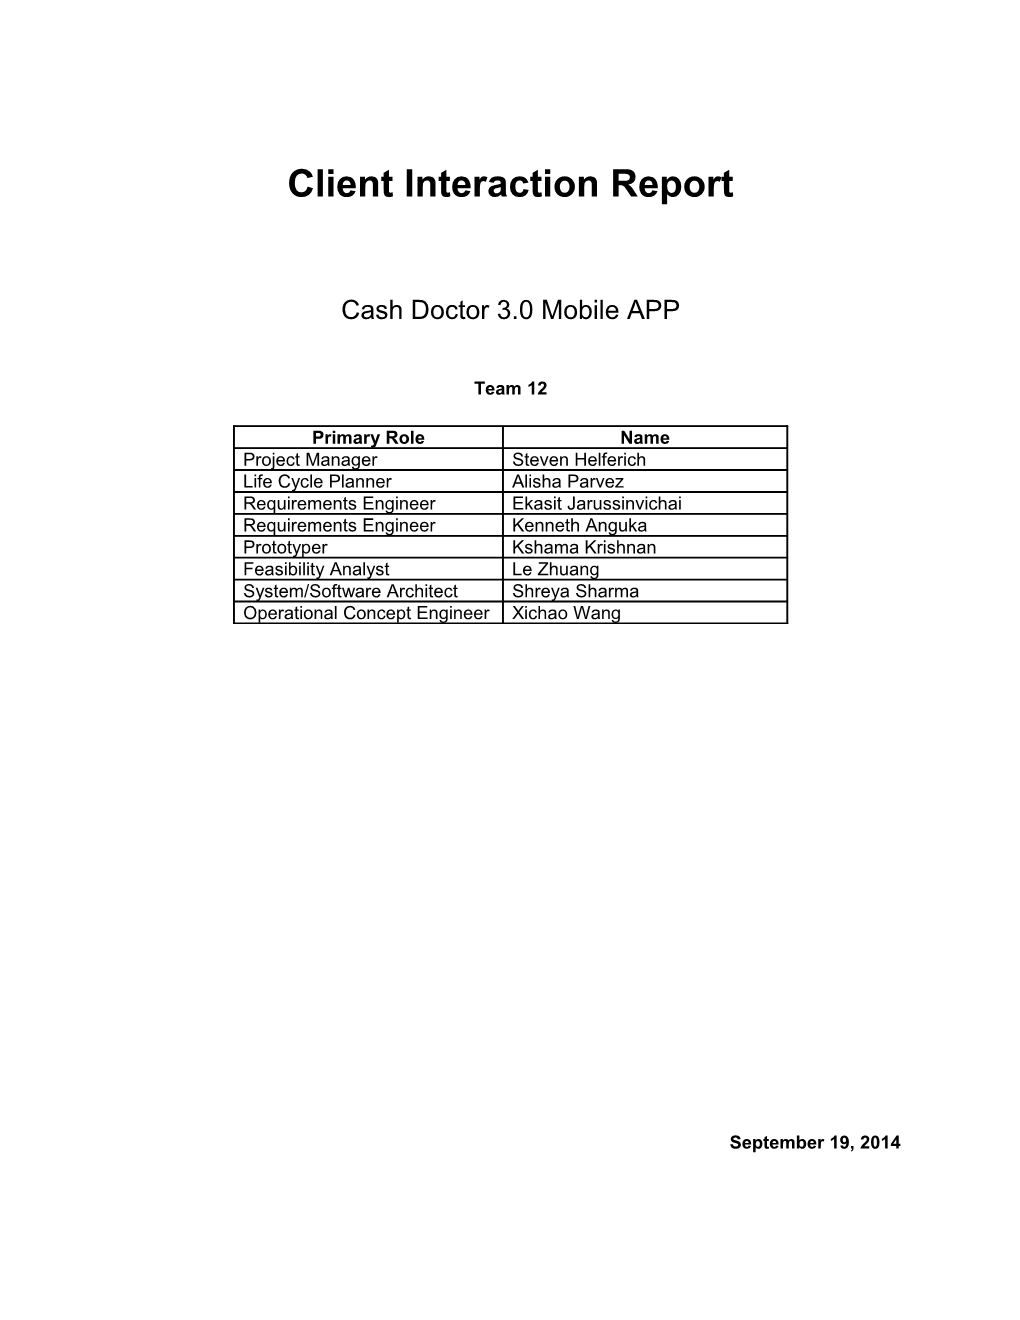 Client Interaction Report Discussion